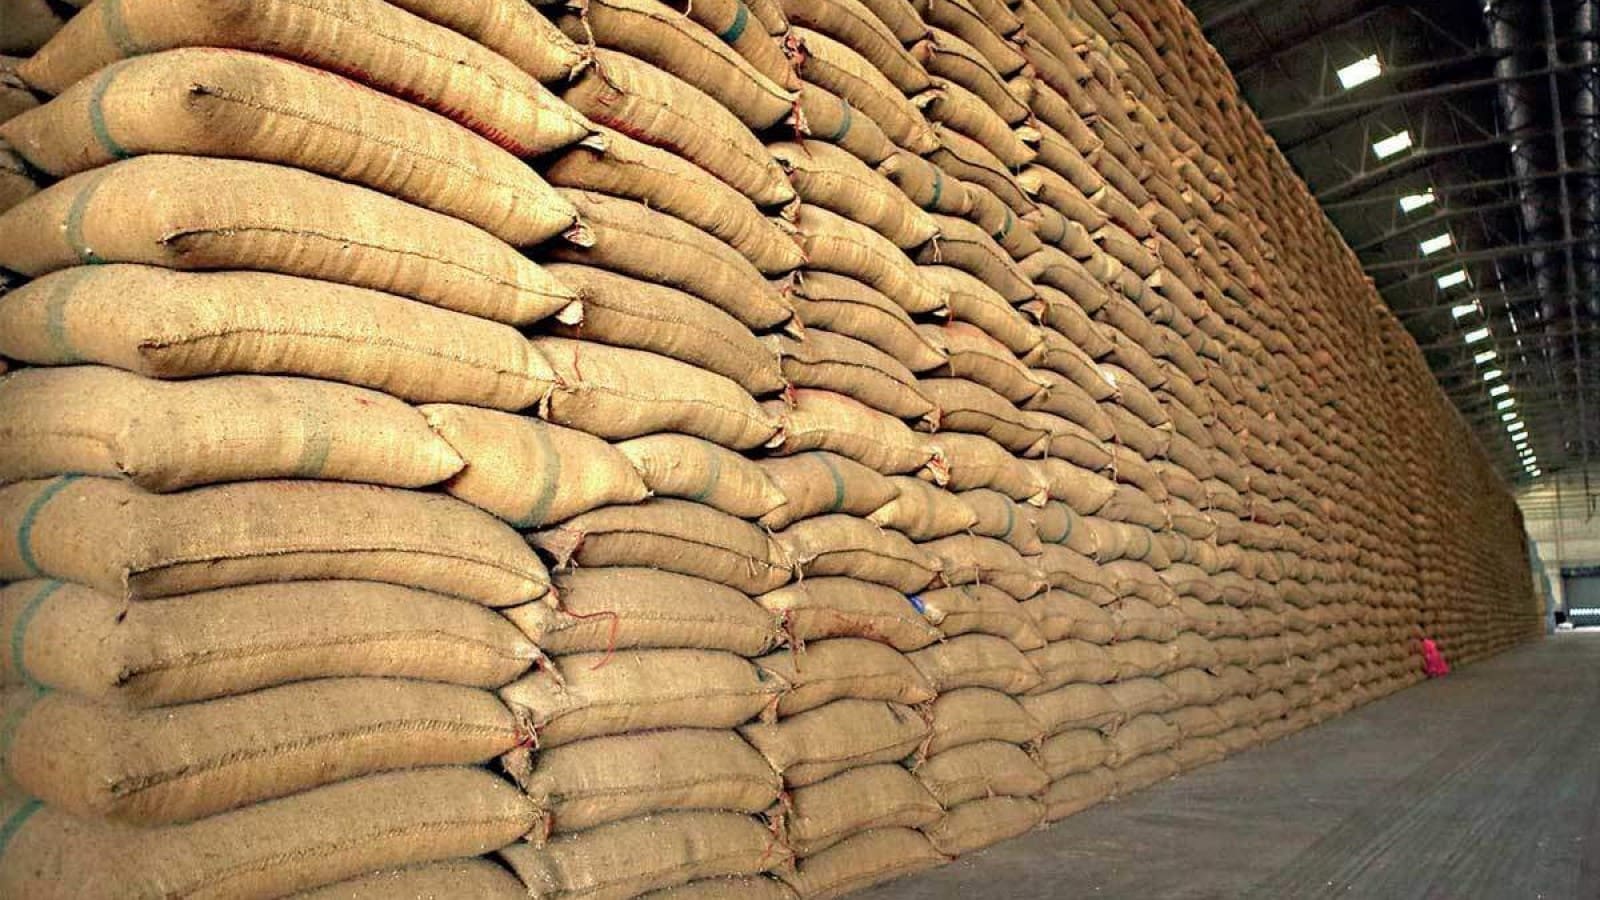 India’s ambitious grain storage expansion to tackle food security challenges 